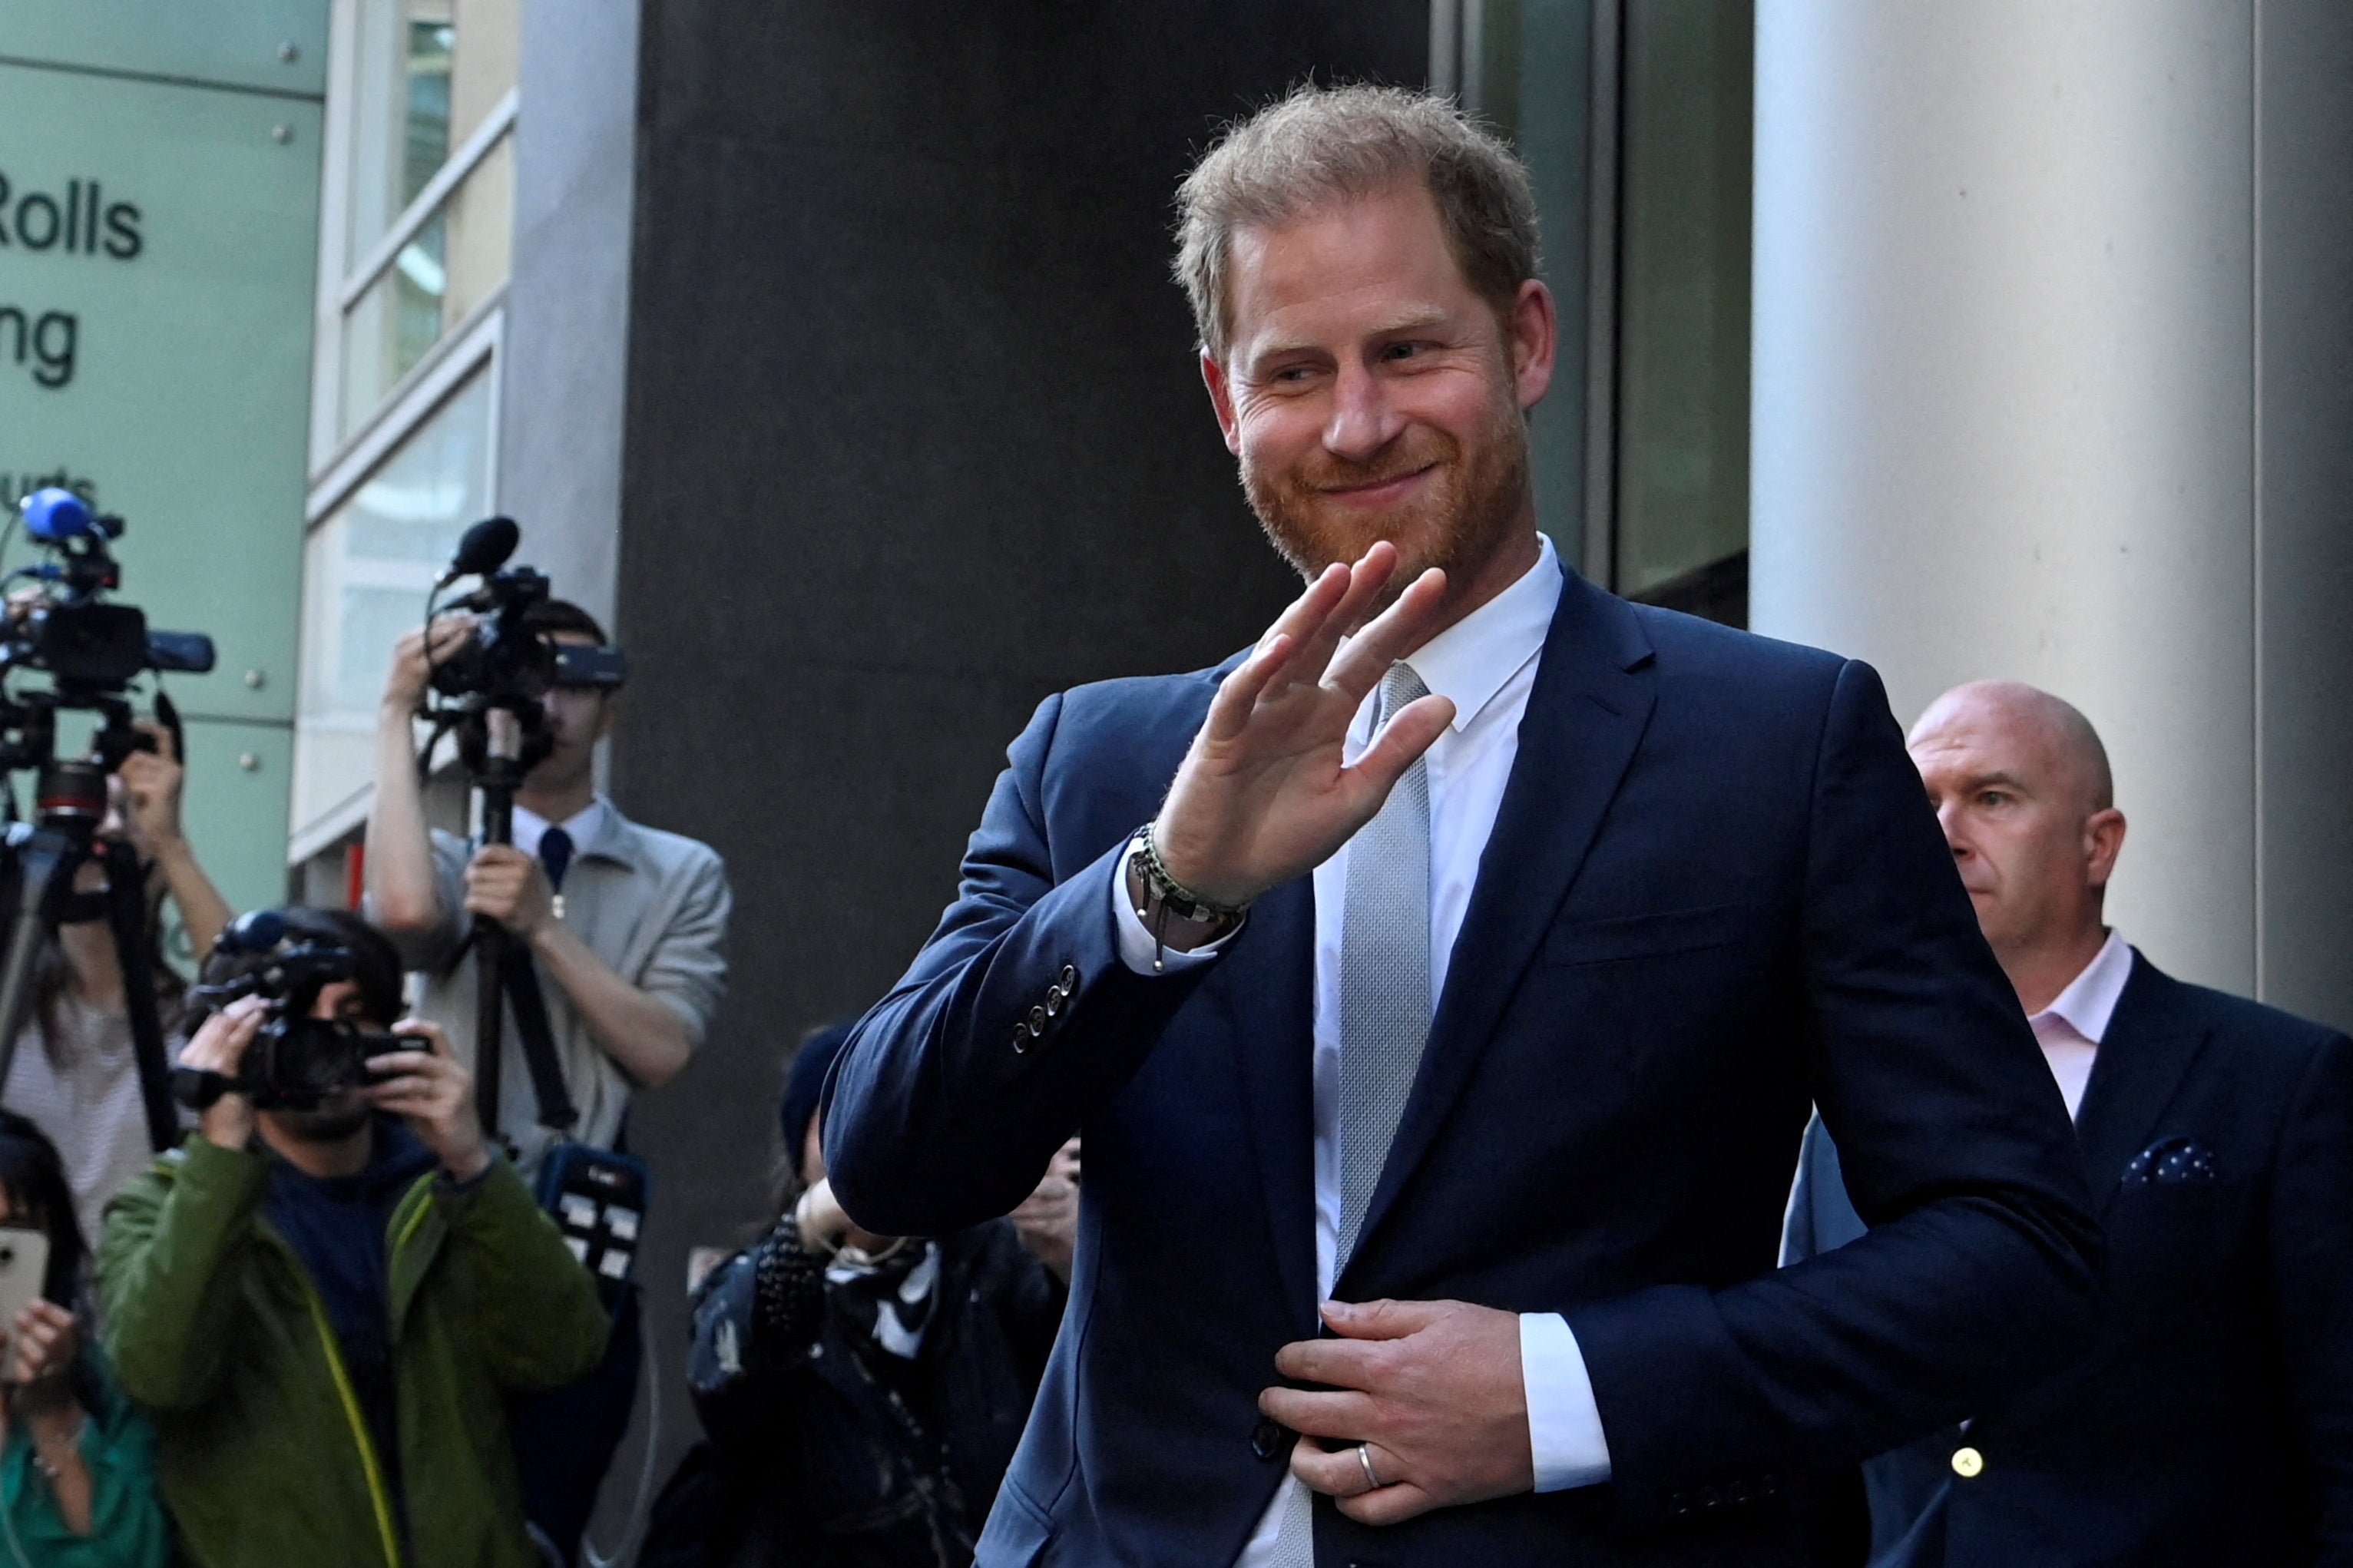 Britain's Prince Harry, Duke of Sussex, waves as he departs the Rolls Building of the High Court in London, Britain June 7, 2023.